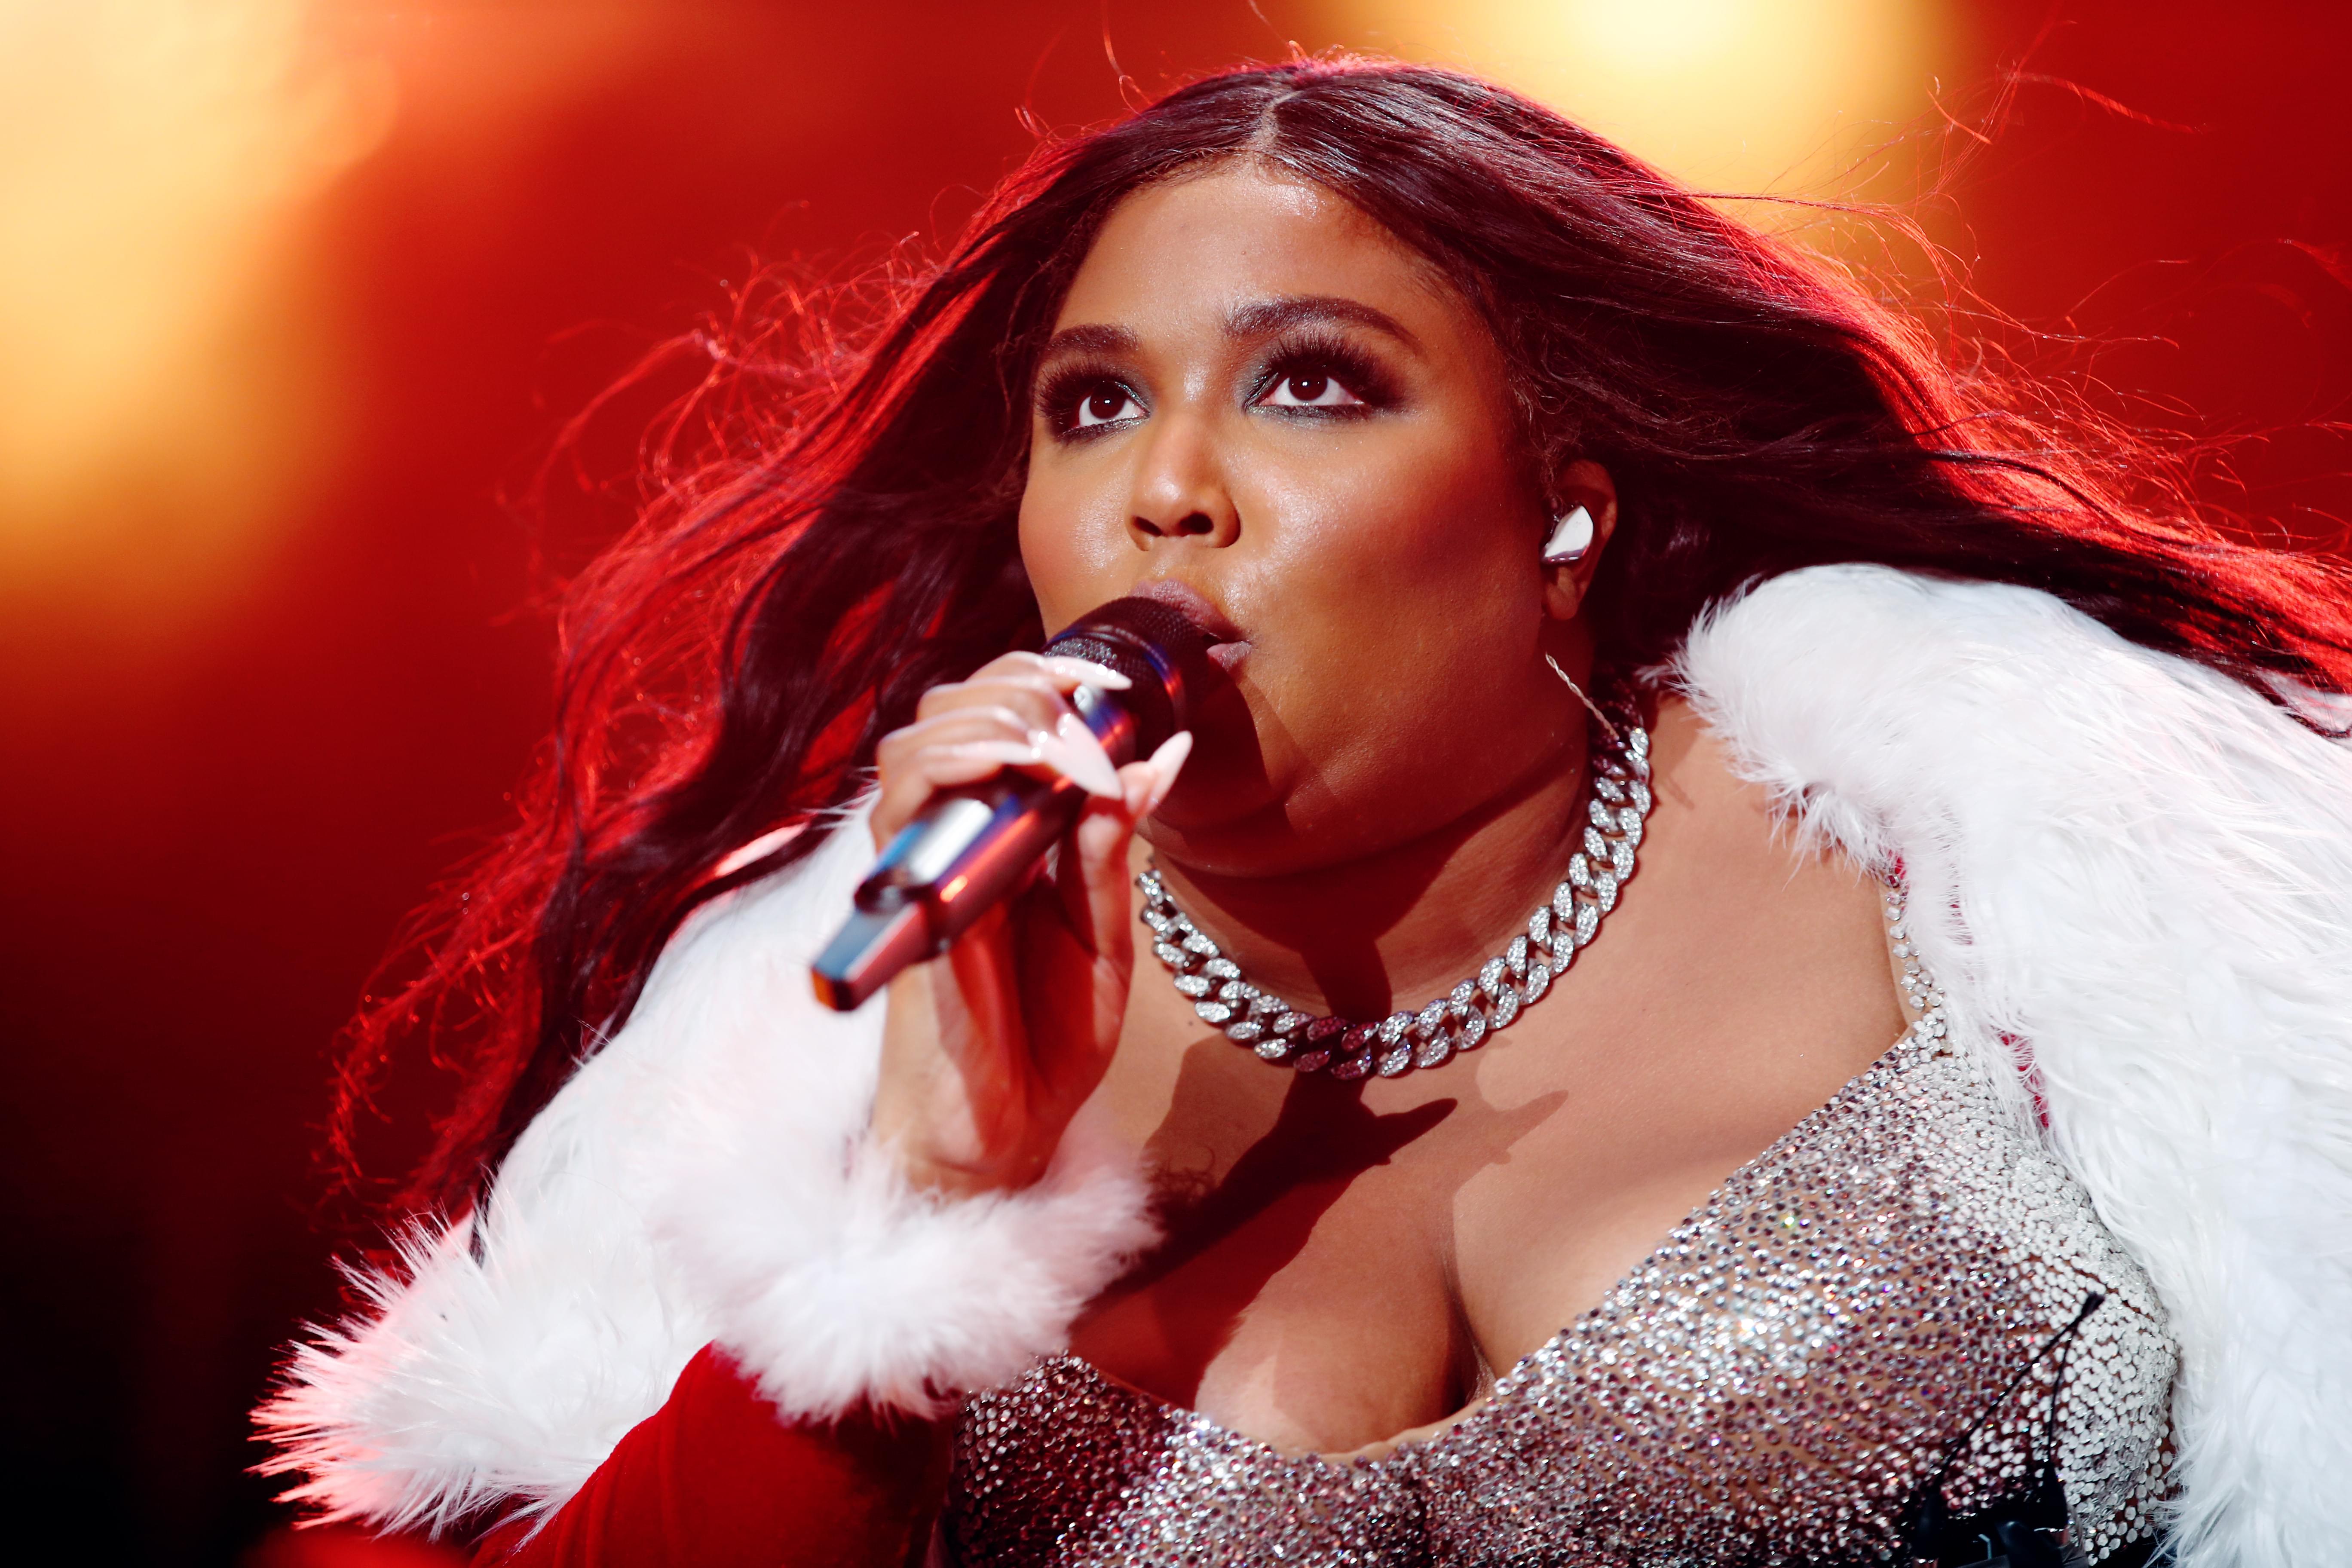 Lizzo Fires Back At Troll Who Says She’s Famous Due To “Obesity Epidemic in America”